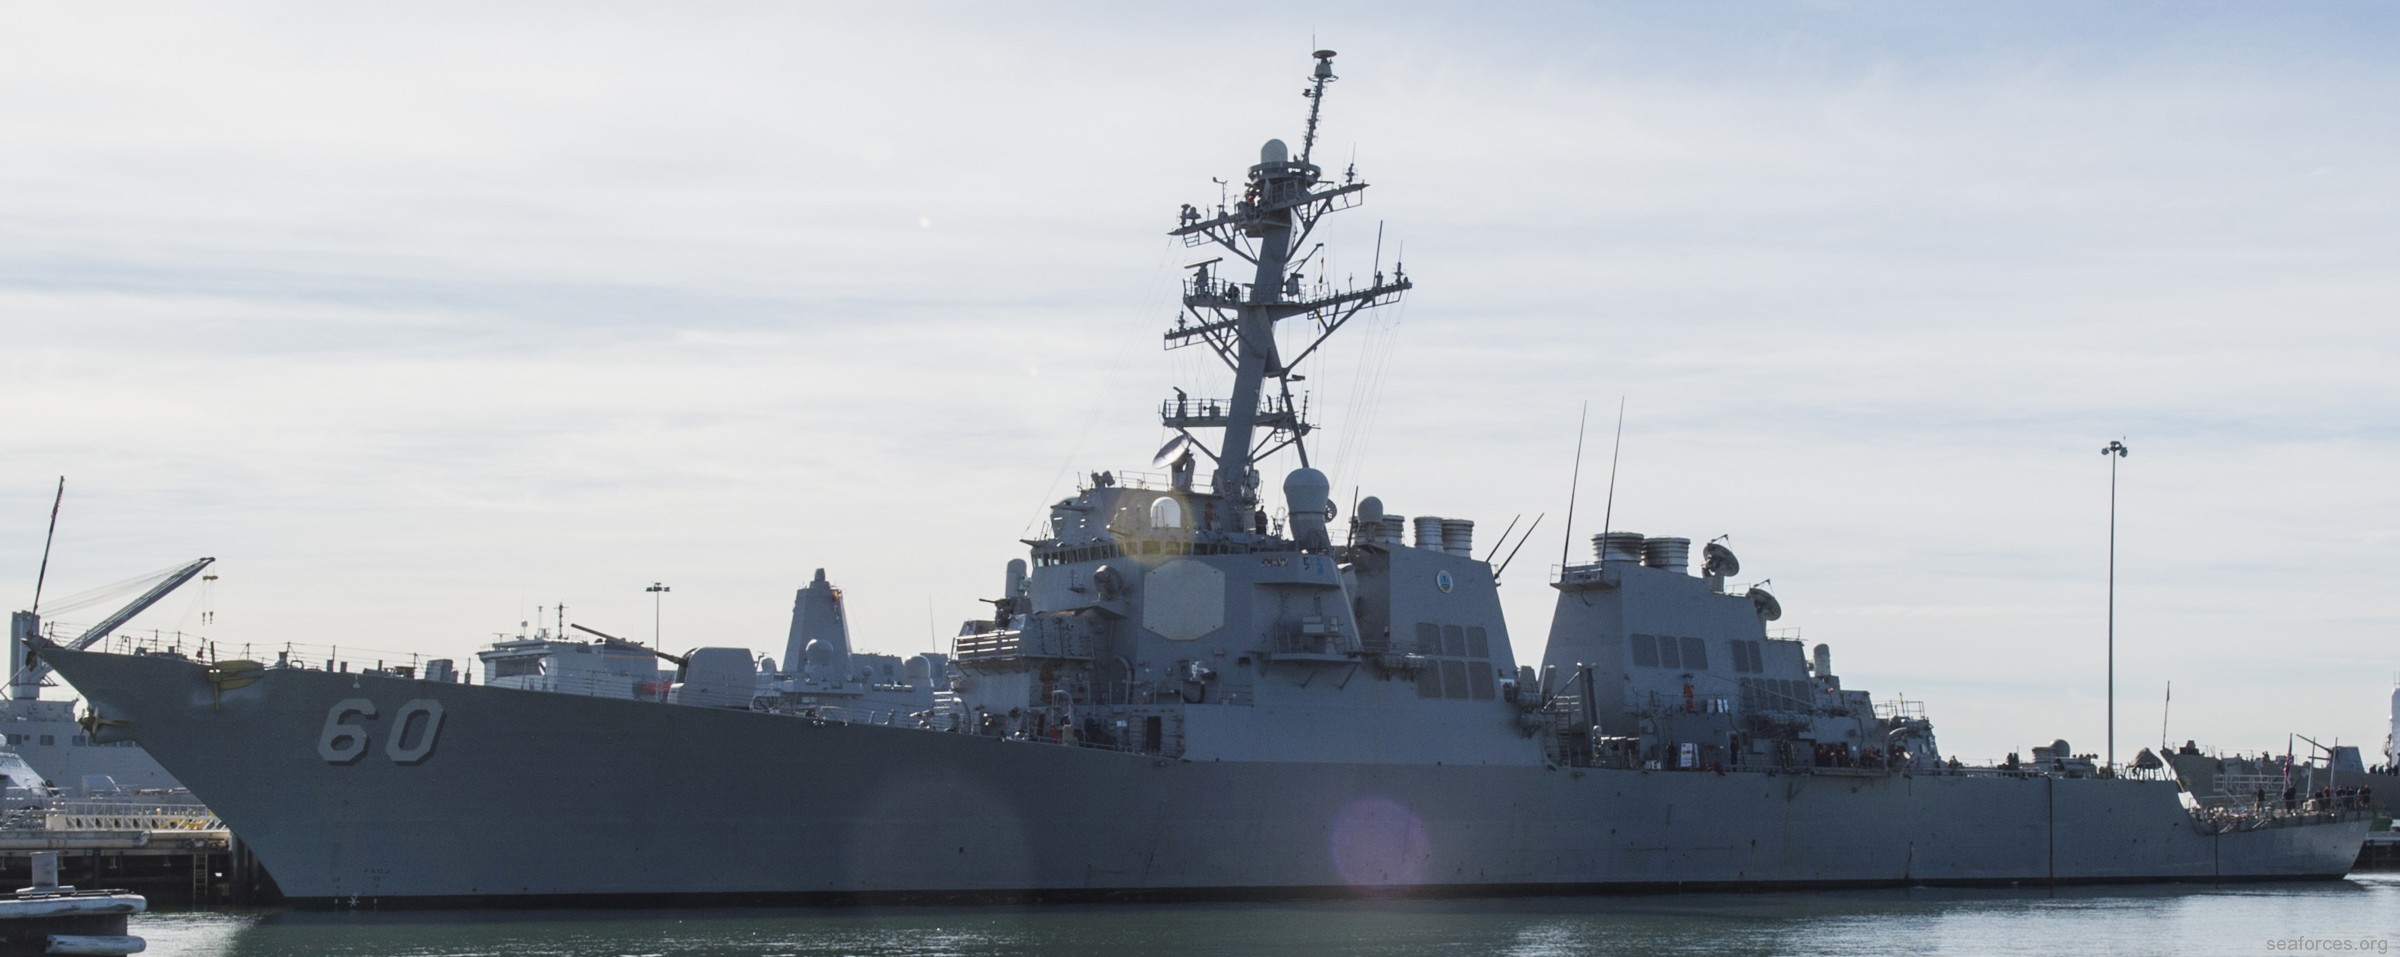 ddg-60 uss paul hamilton guided missile destroyer us navy 71